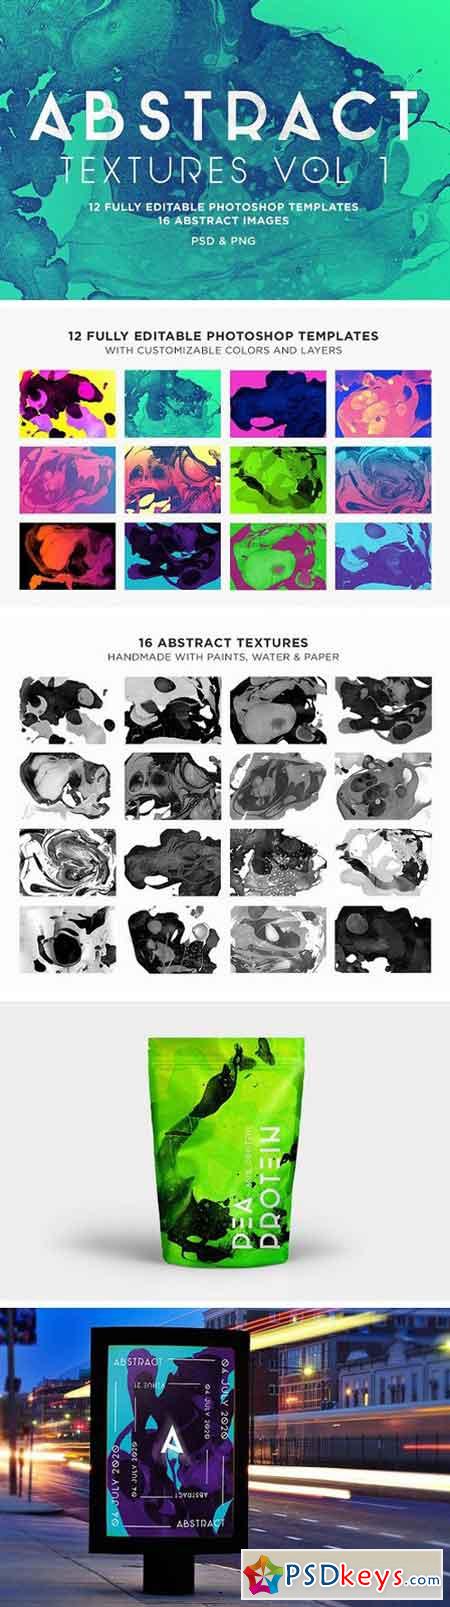 Abstract Textures Vol 1 1653583